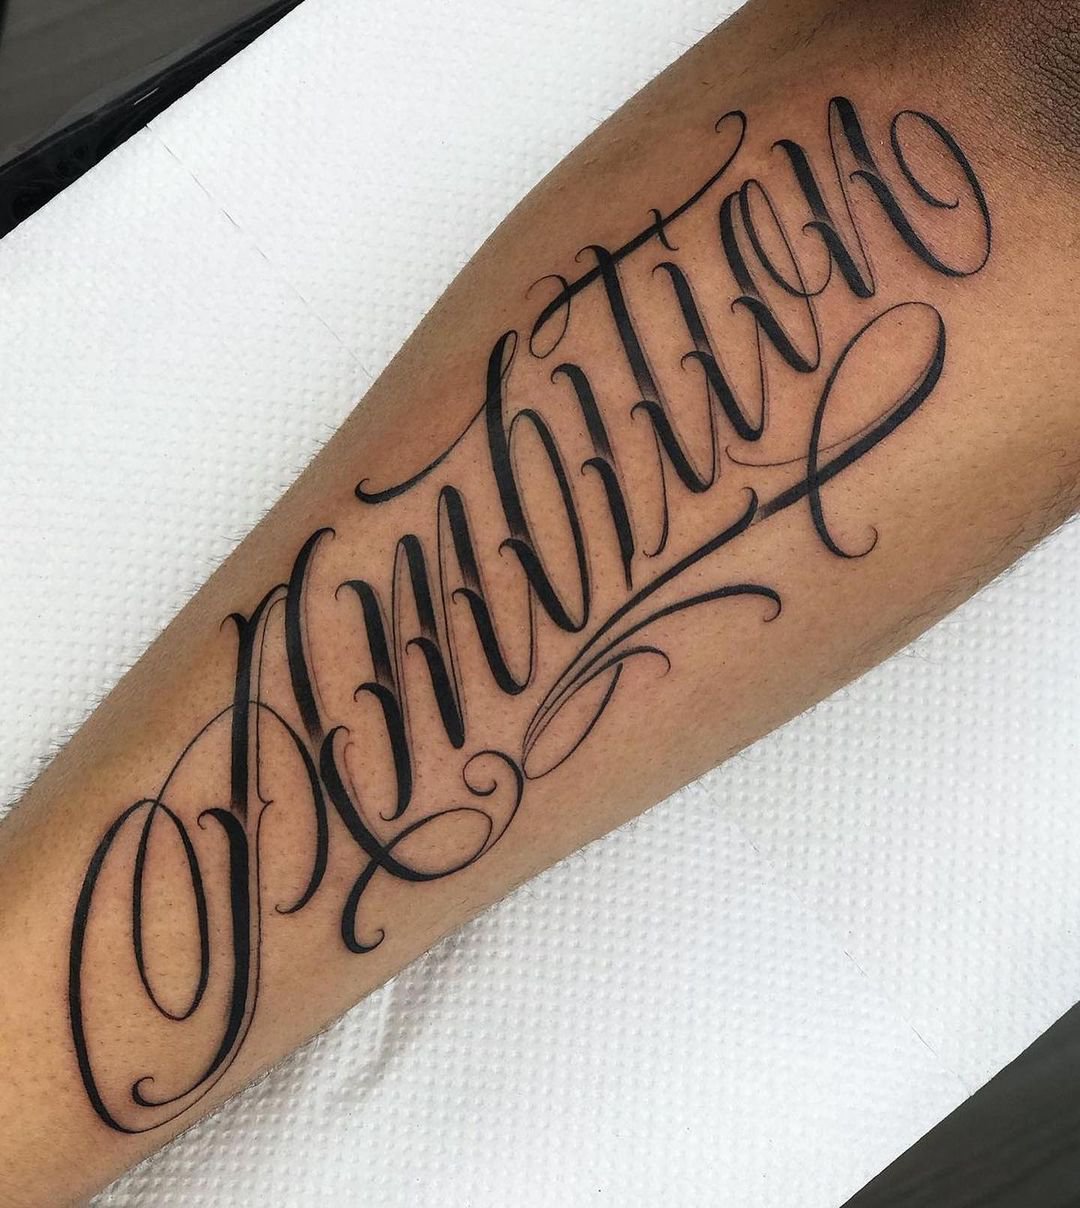 How to do lettering in tattoos?